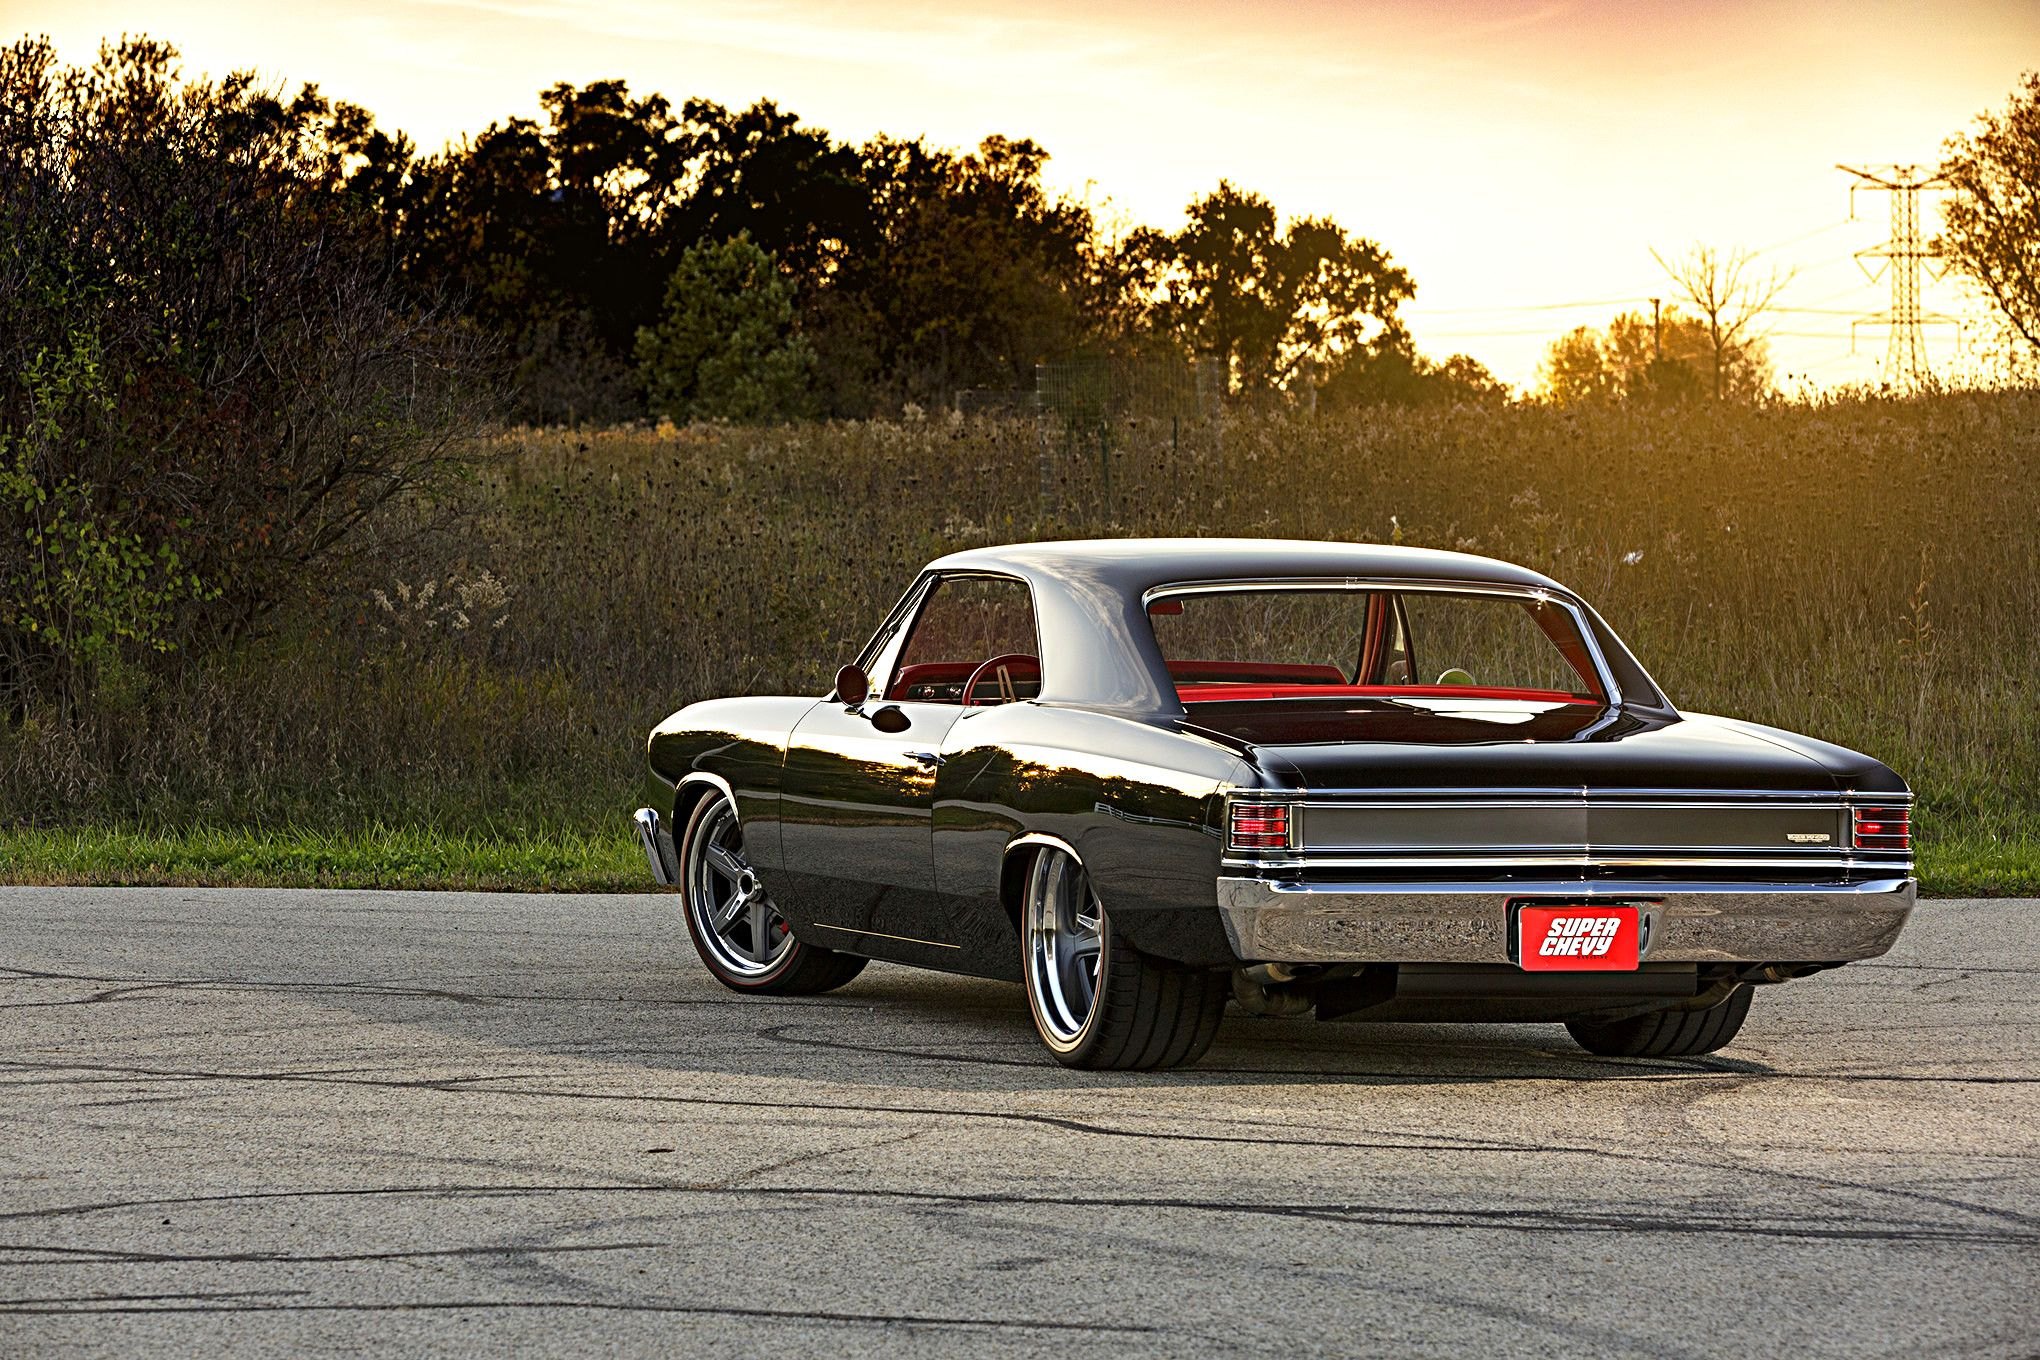 Black Chevy Chevelle with Custom Exhaust System - Photo by Forgeline Motorsports